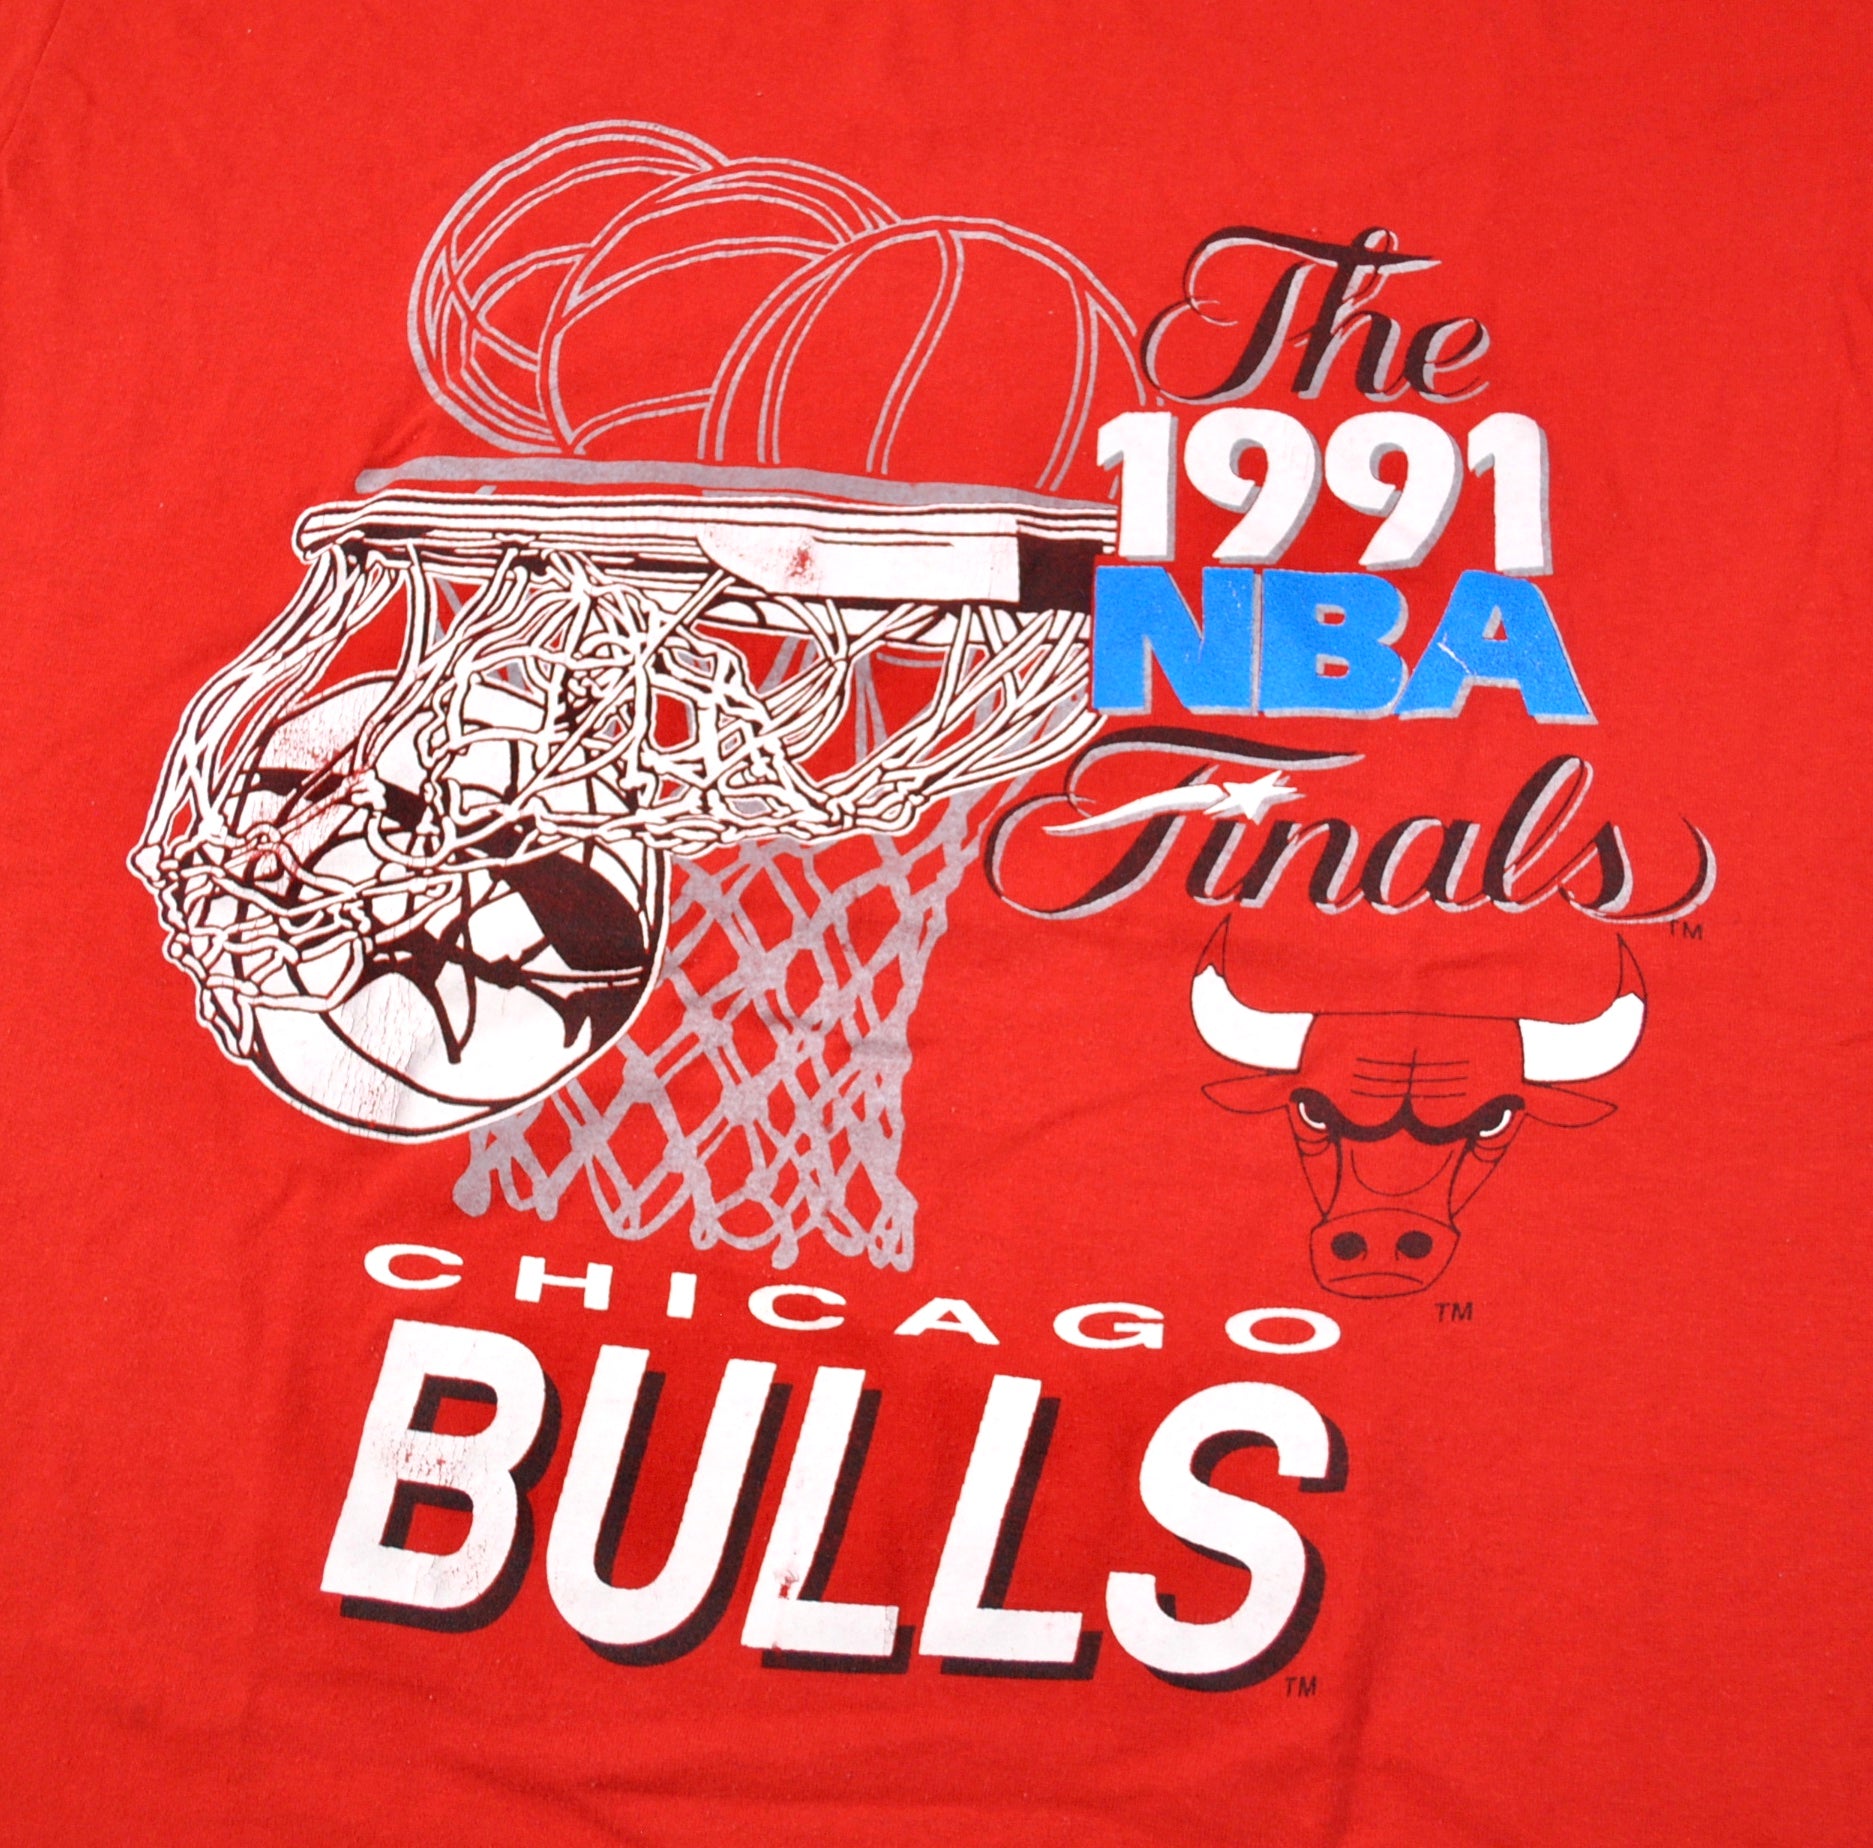 Chicago Bulls on X: What was your first jersey?